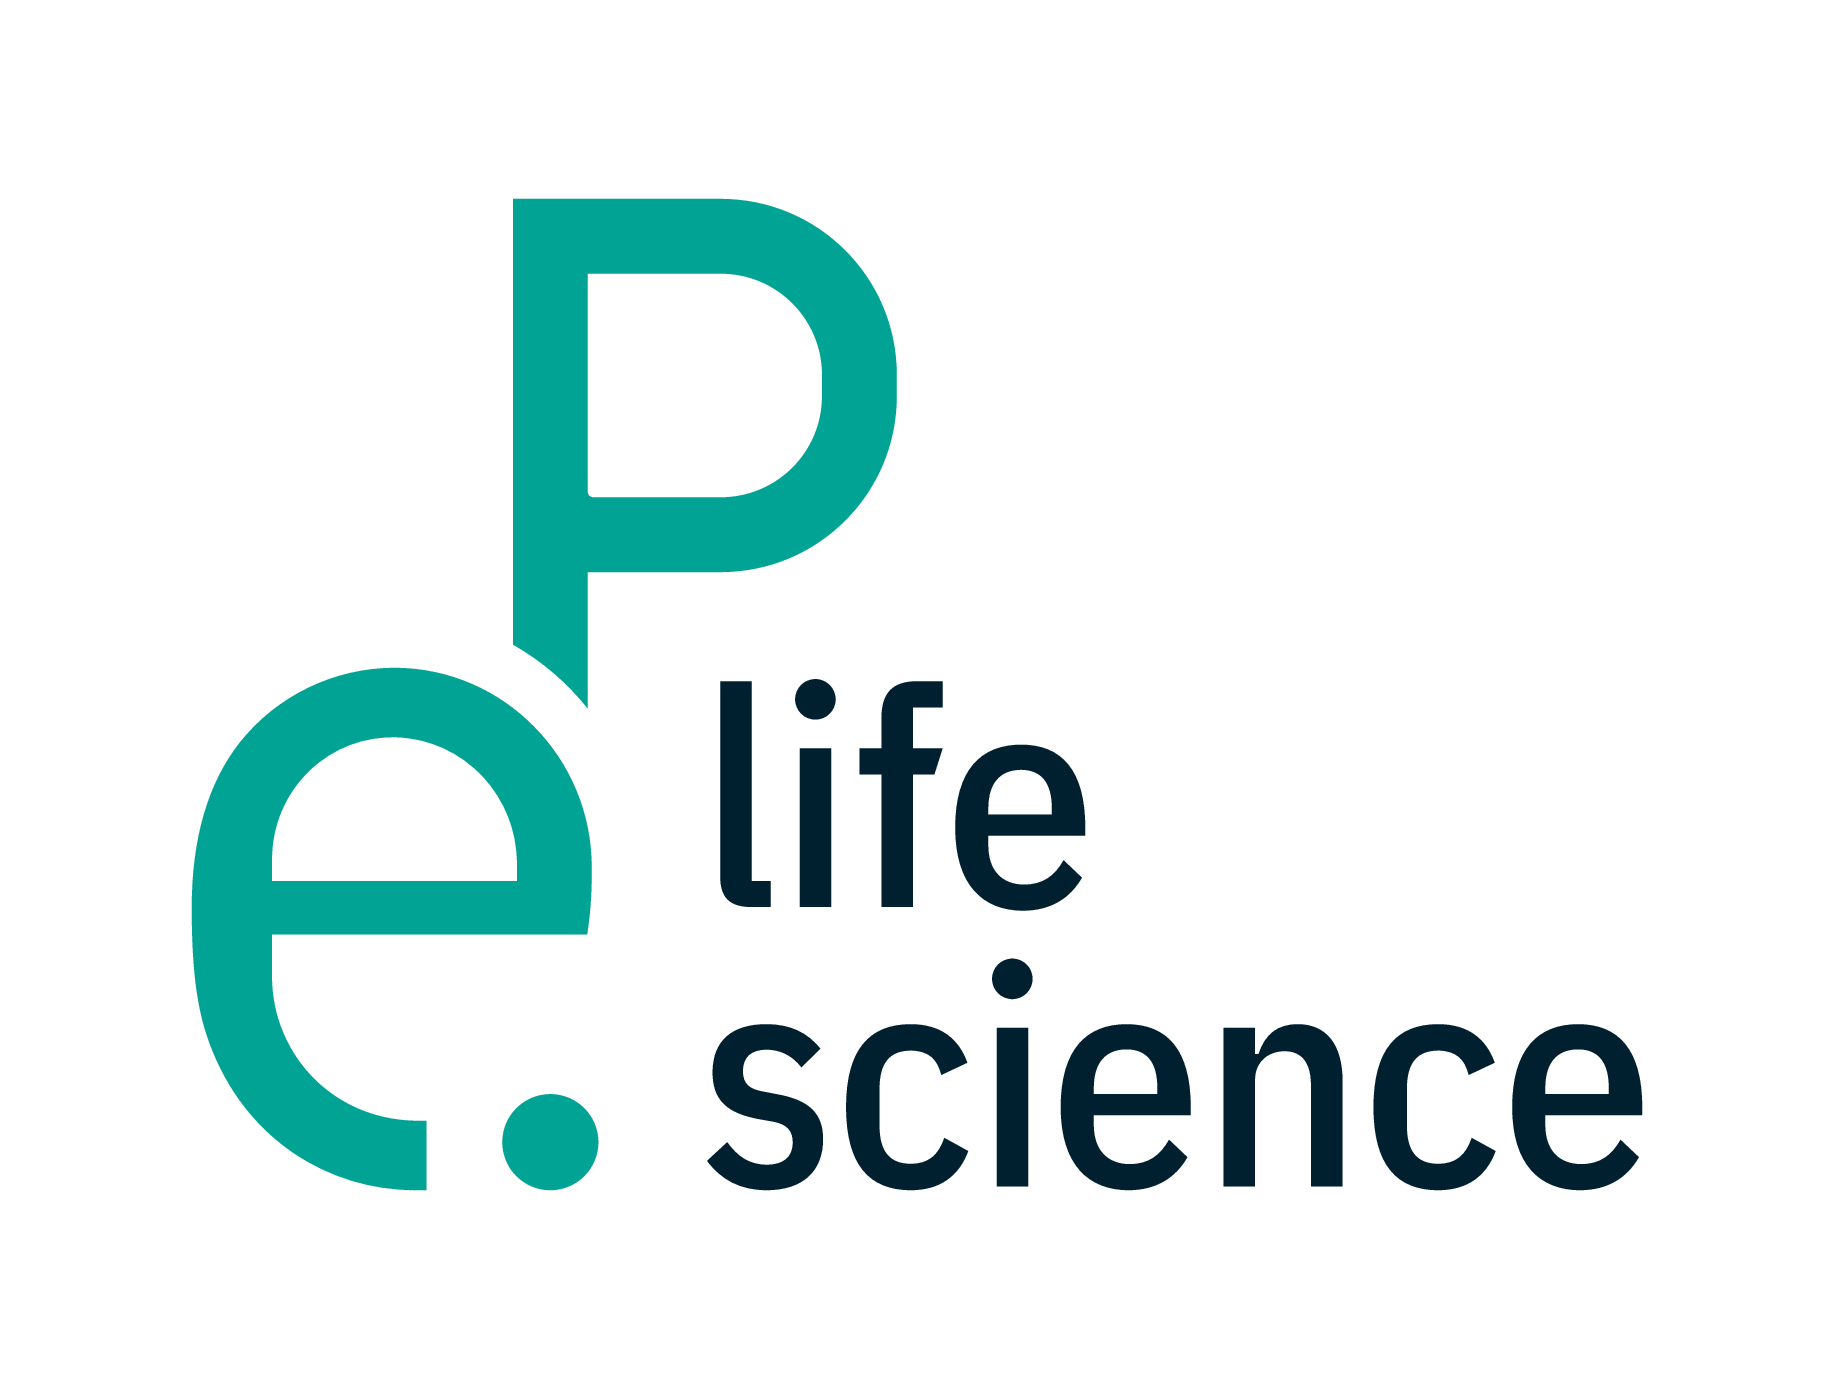 ep Life Science